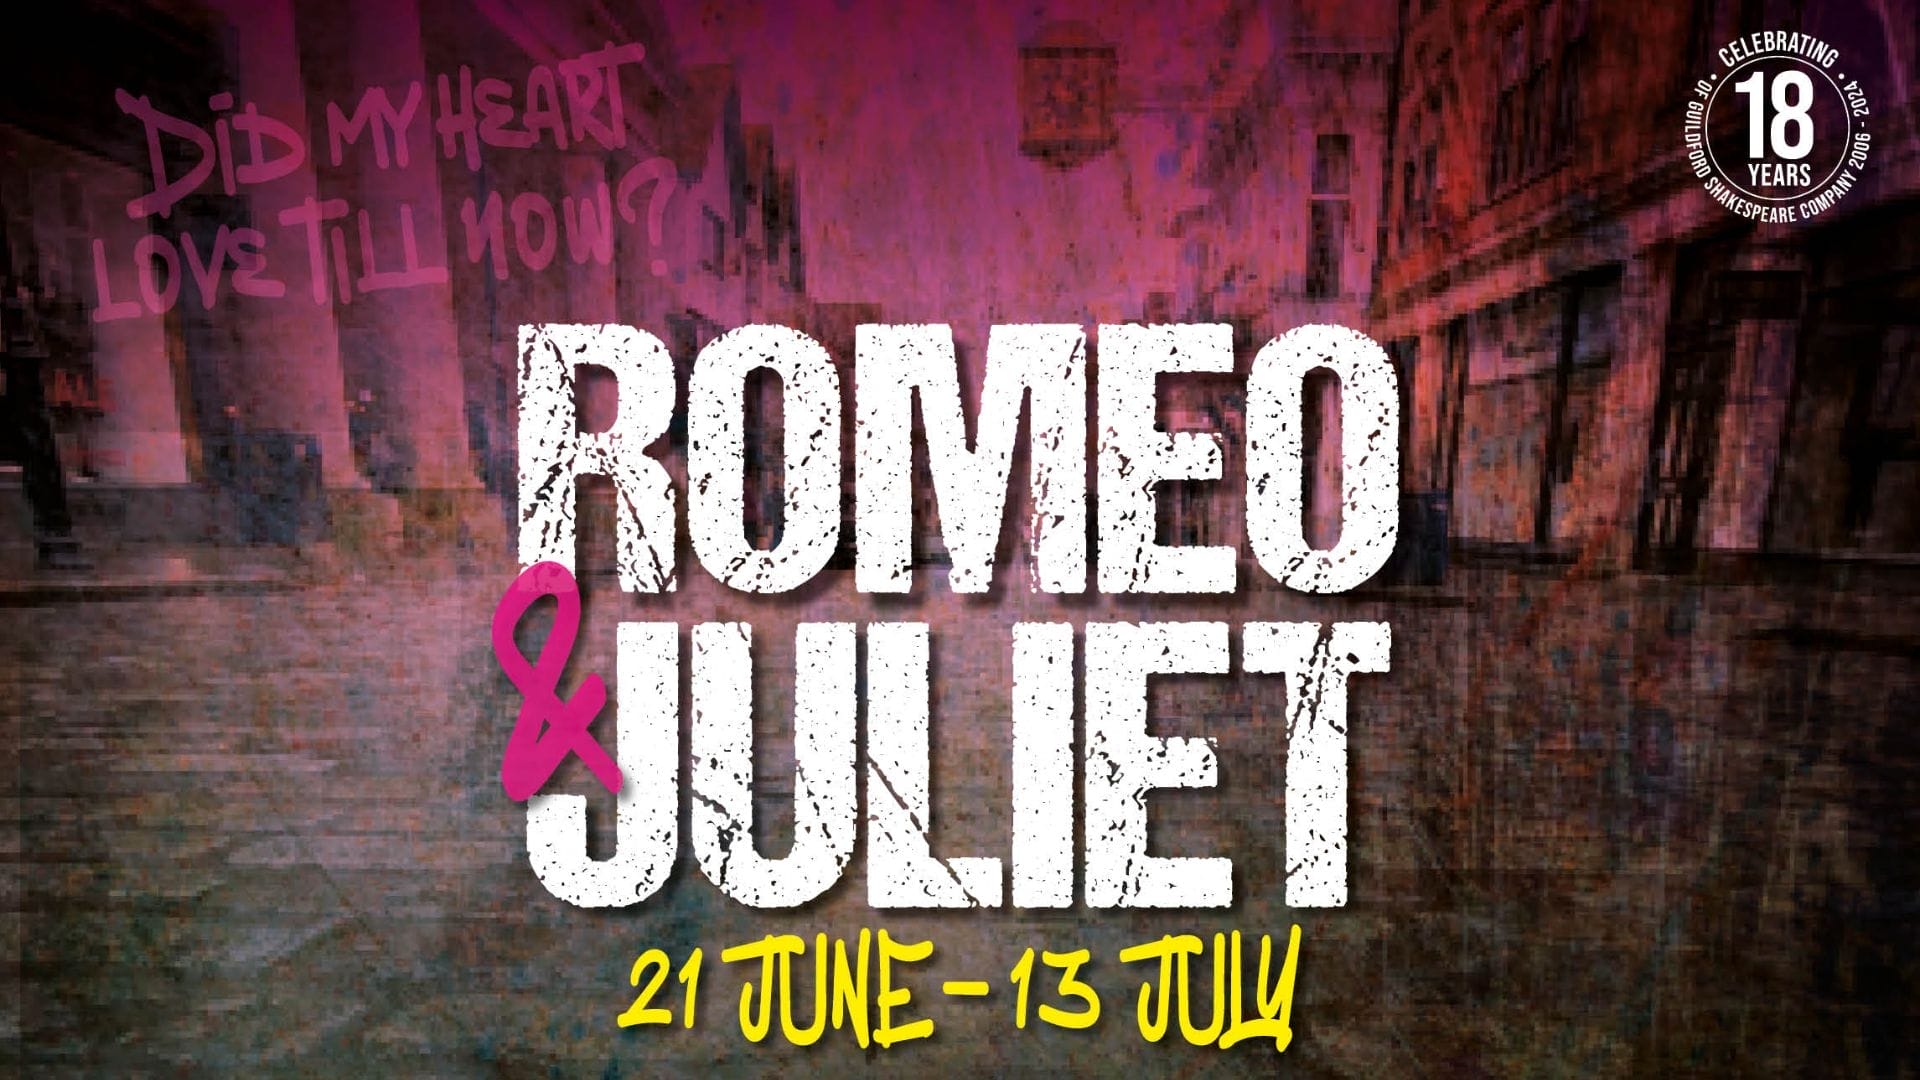 Guildford Shakespeare Company will take over the High Street with an ...